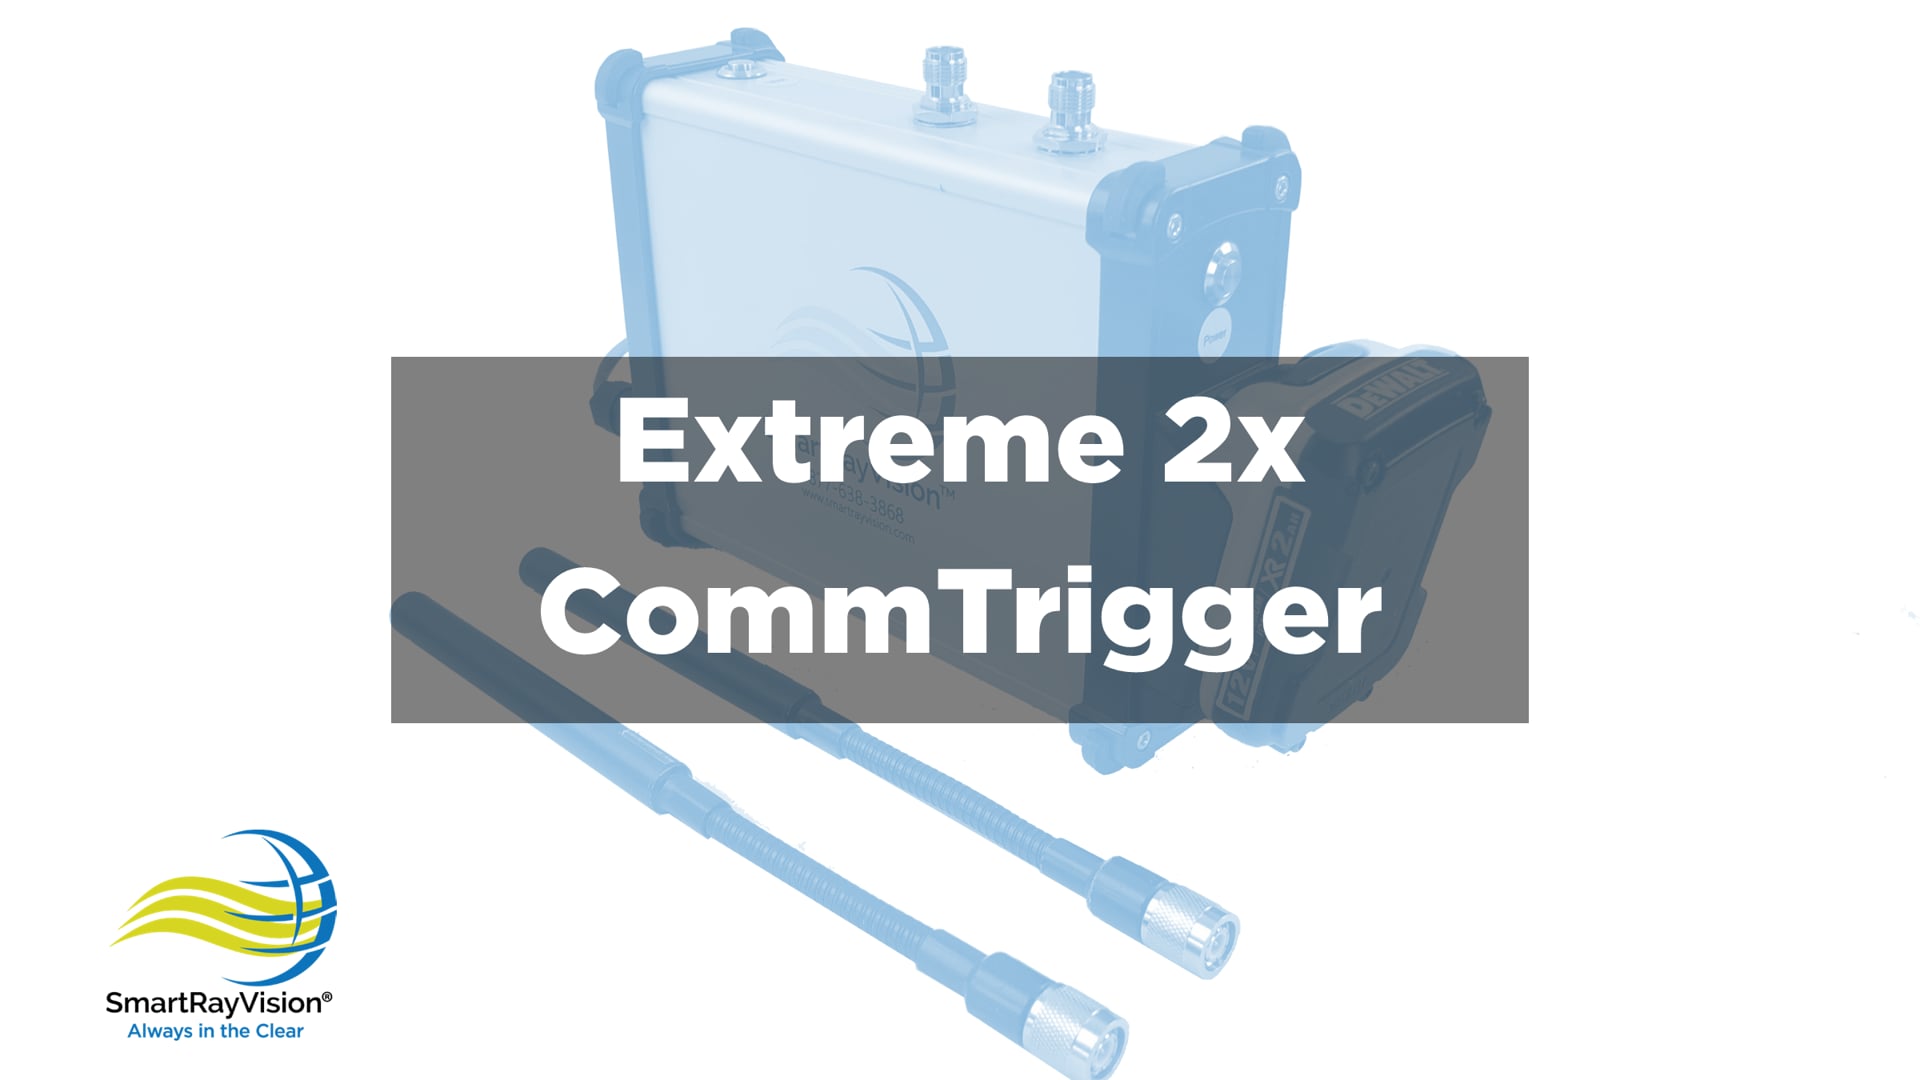 2x CommTrigger - Wireless Operation